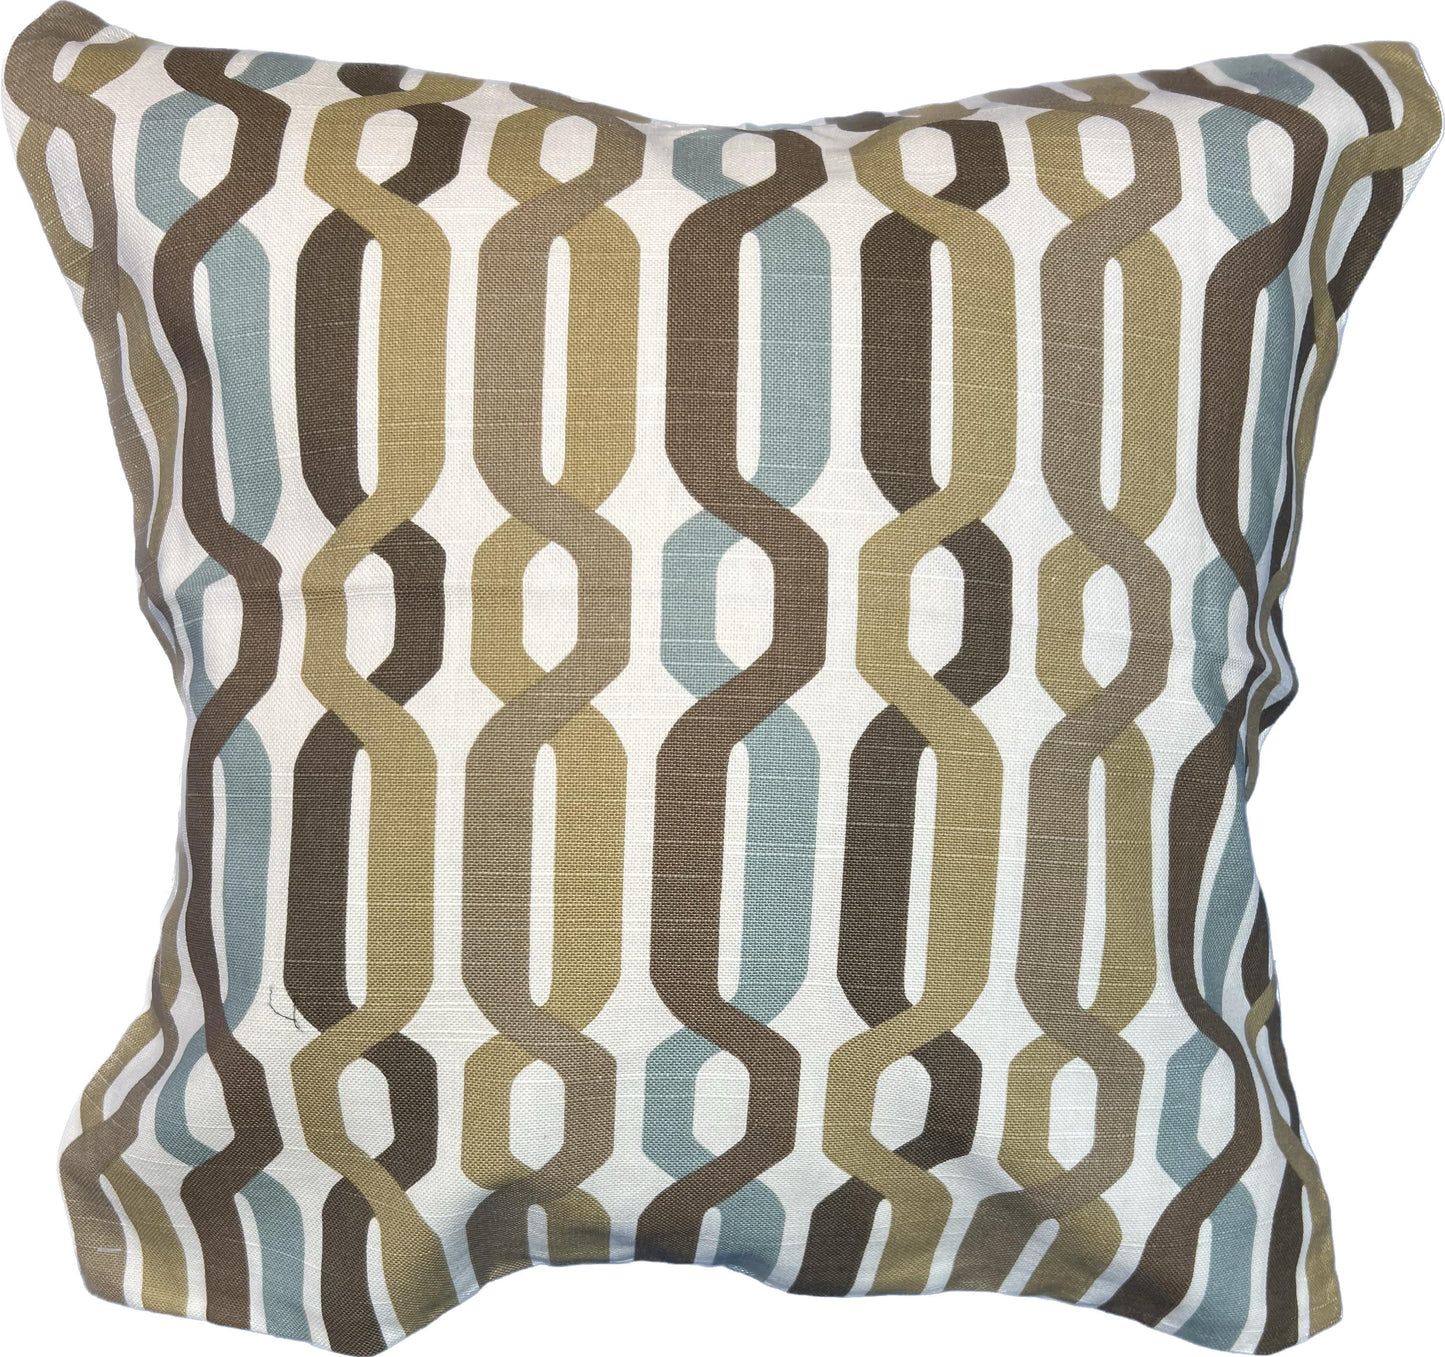 20"x20" Trellis Pillow Cover (RM Coco: Youngblood - Bark)